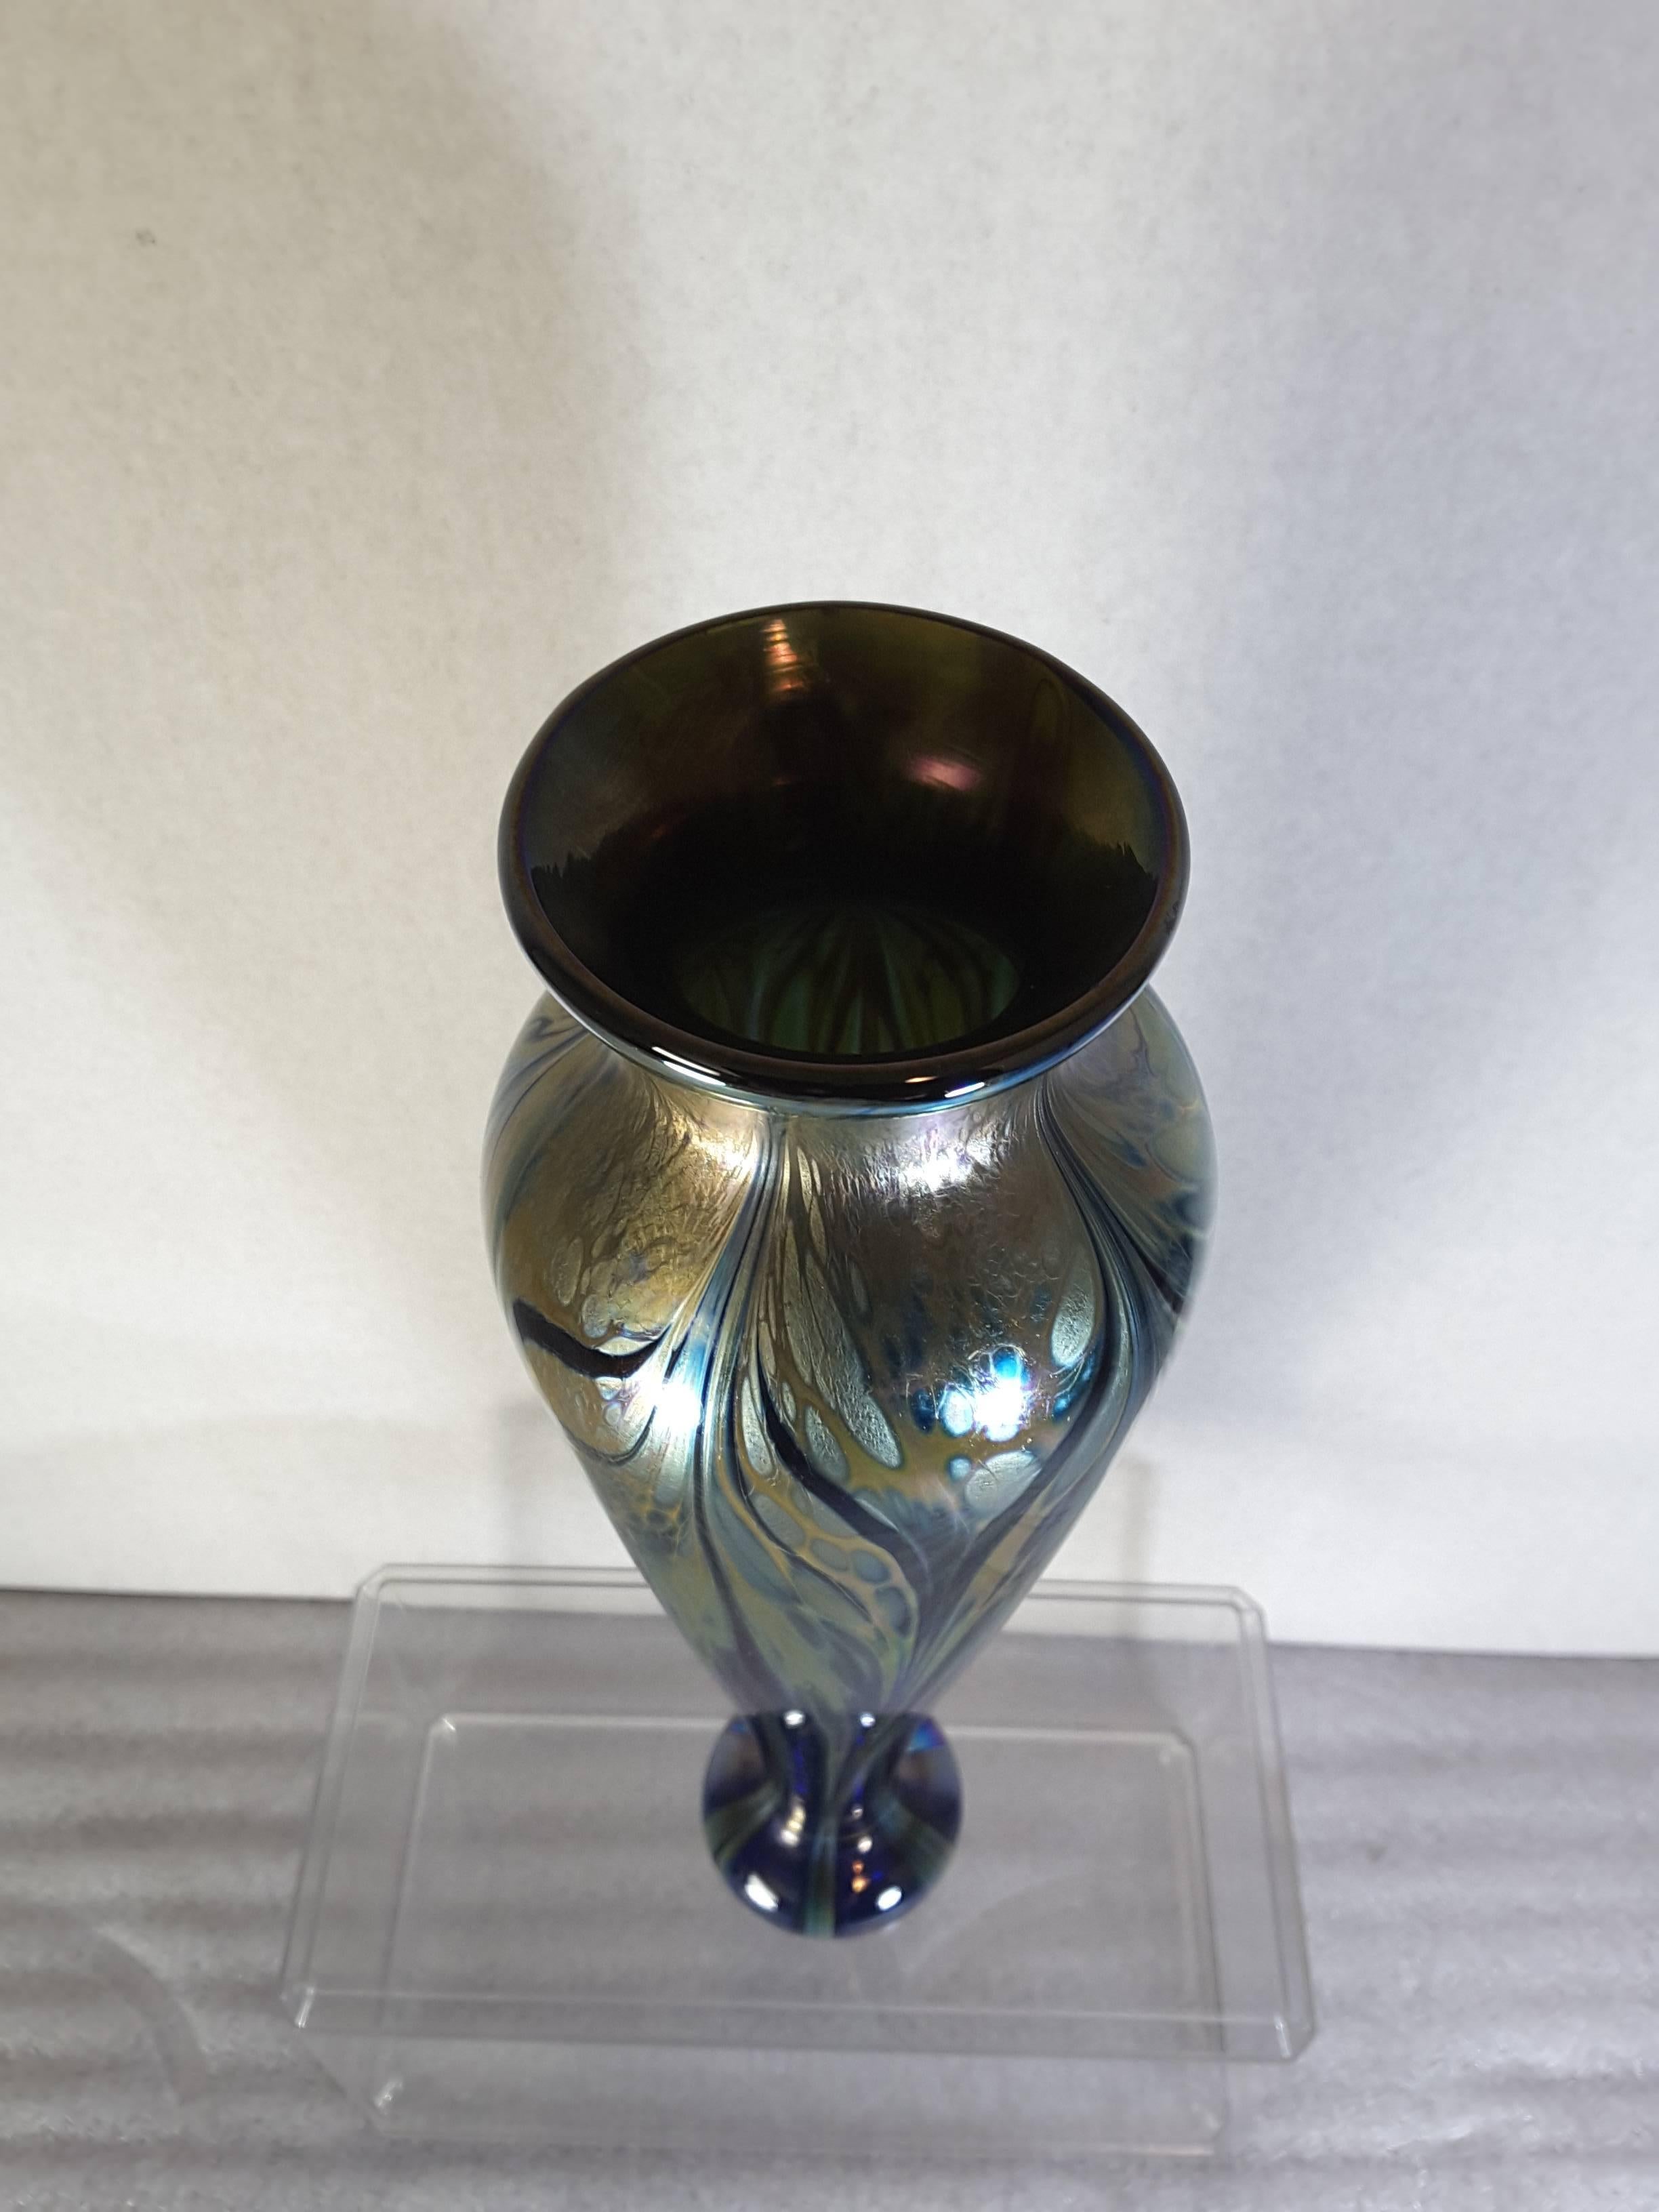 Kent Fiske iridescent oil spot on water pulled feather vase signed and dated 1984. The vase is a deep blue and iridescent pulled feather pattern with oil spot on water finish. The vase is a tall baluster shape, signed and dated on the side of the